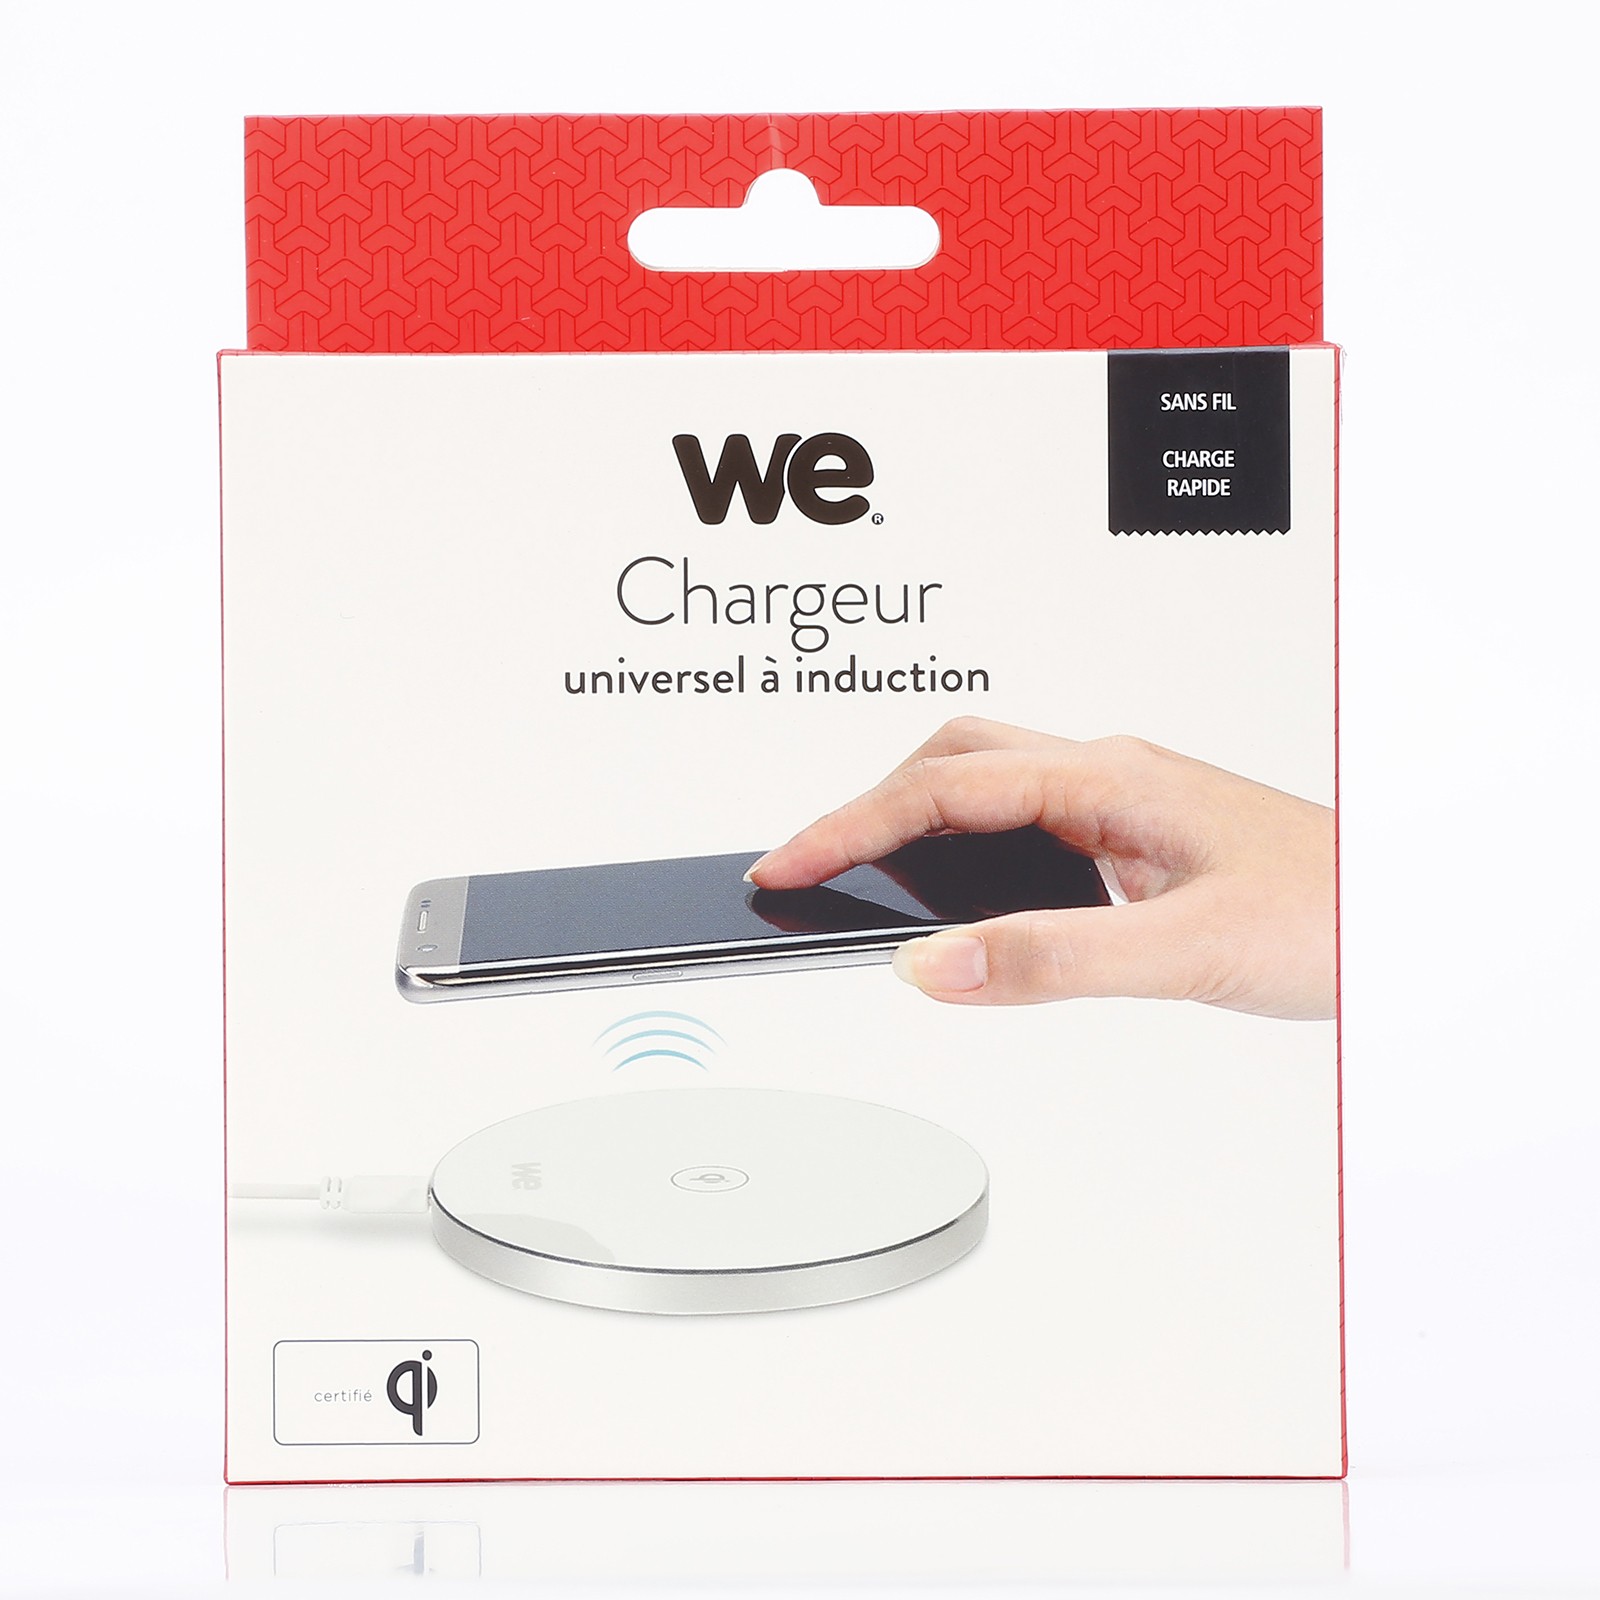 Chargeur sans fil induction 10W Charge Rapide universel pour iPhone Samsung  Huawei QI